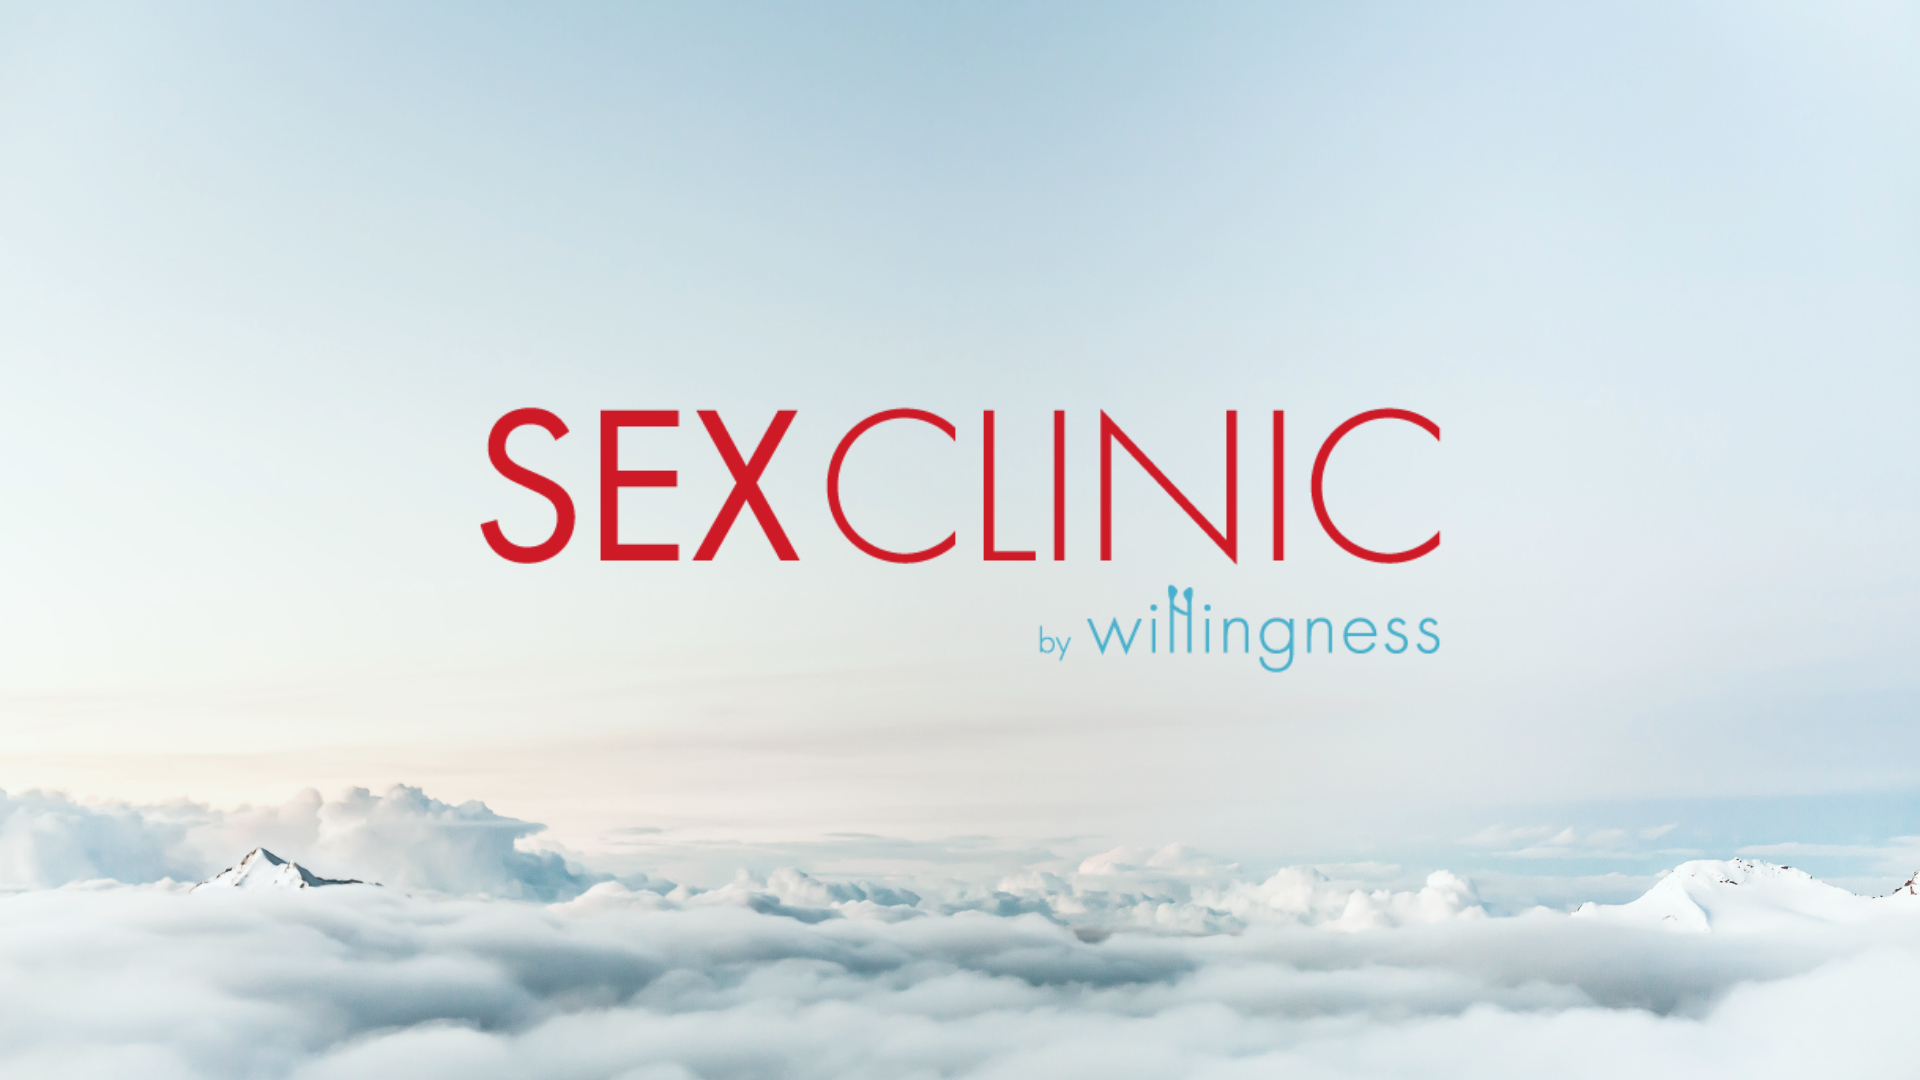 sex clinic logo, a subbrand by Willingness. The background is a blue sky with clouds